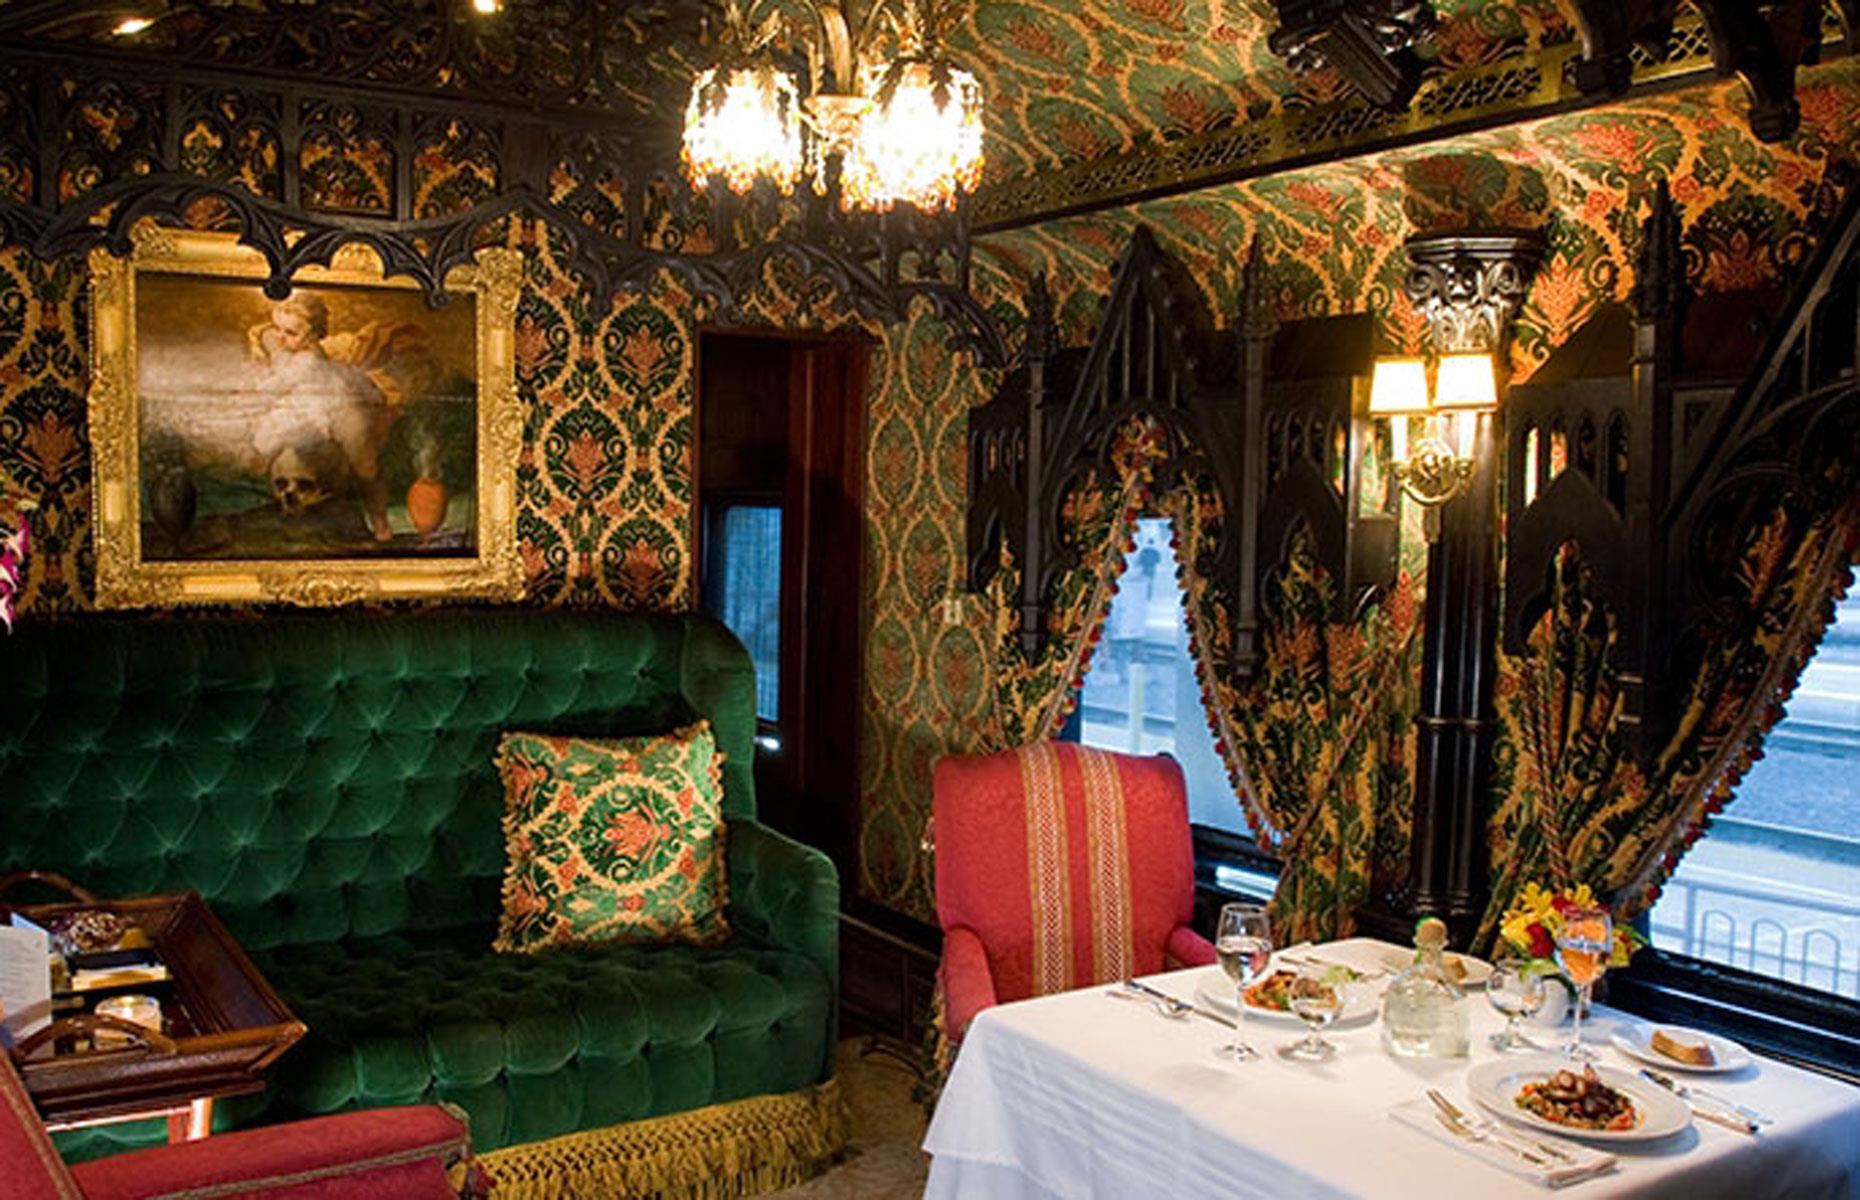 Rags-to-riches billionaire John Paul DeJoria may own three private jets, but the Patrón Tequila Express, the private 1927 railway car he bought in 1996, is his pride and joy. DeJoria spent $2 million (£1.3m) renovating the carriage, which is decorated “maharajah’s palace style” with gorgeous green velvet sofas, ornate chandeliers and brocade drapes.